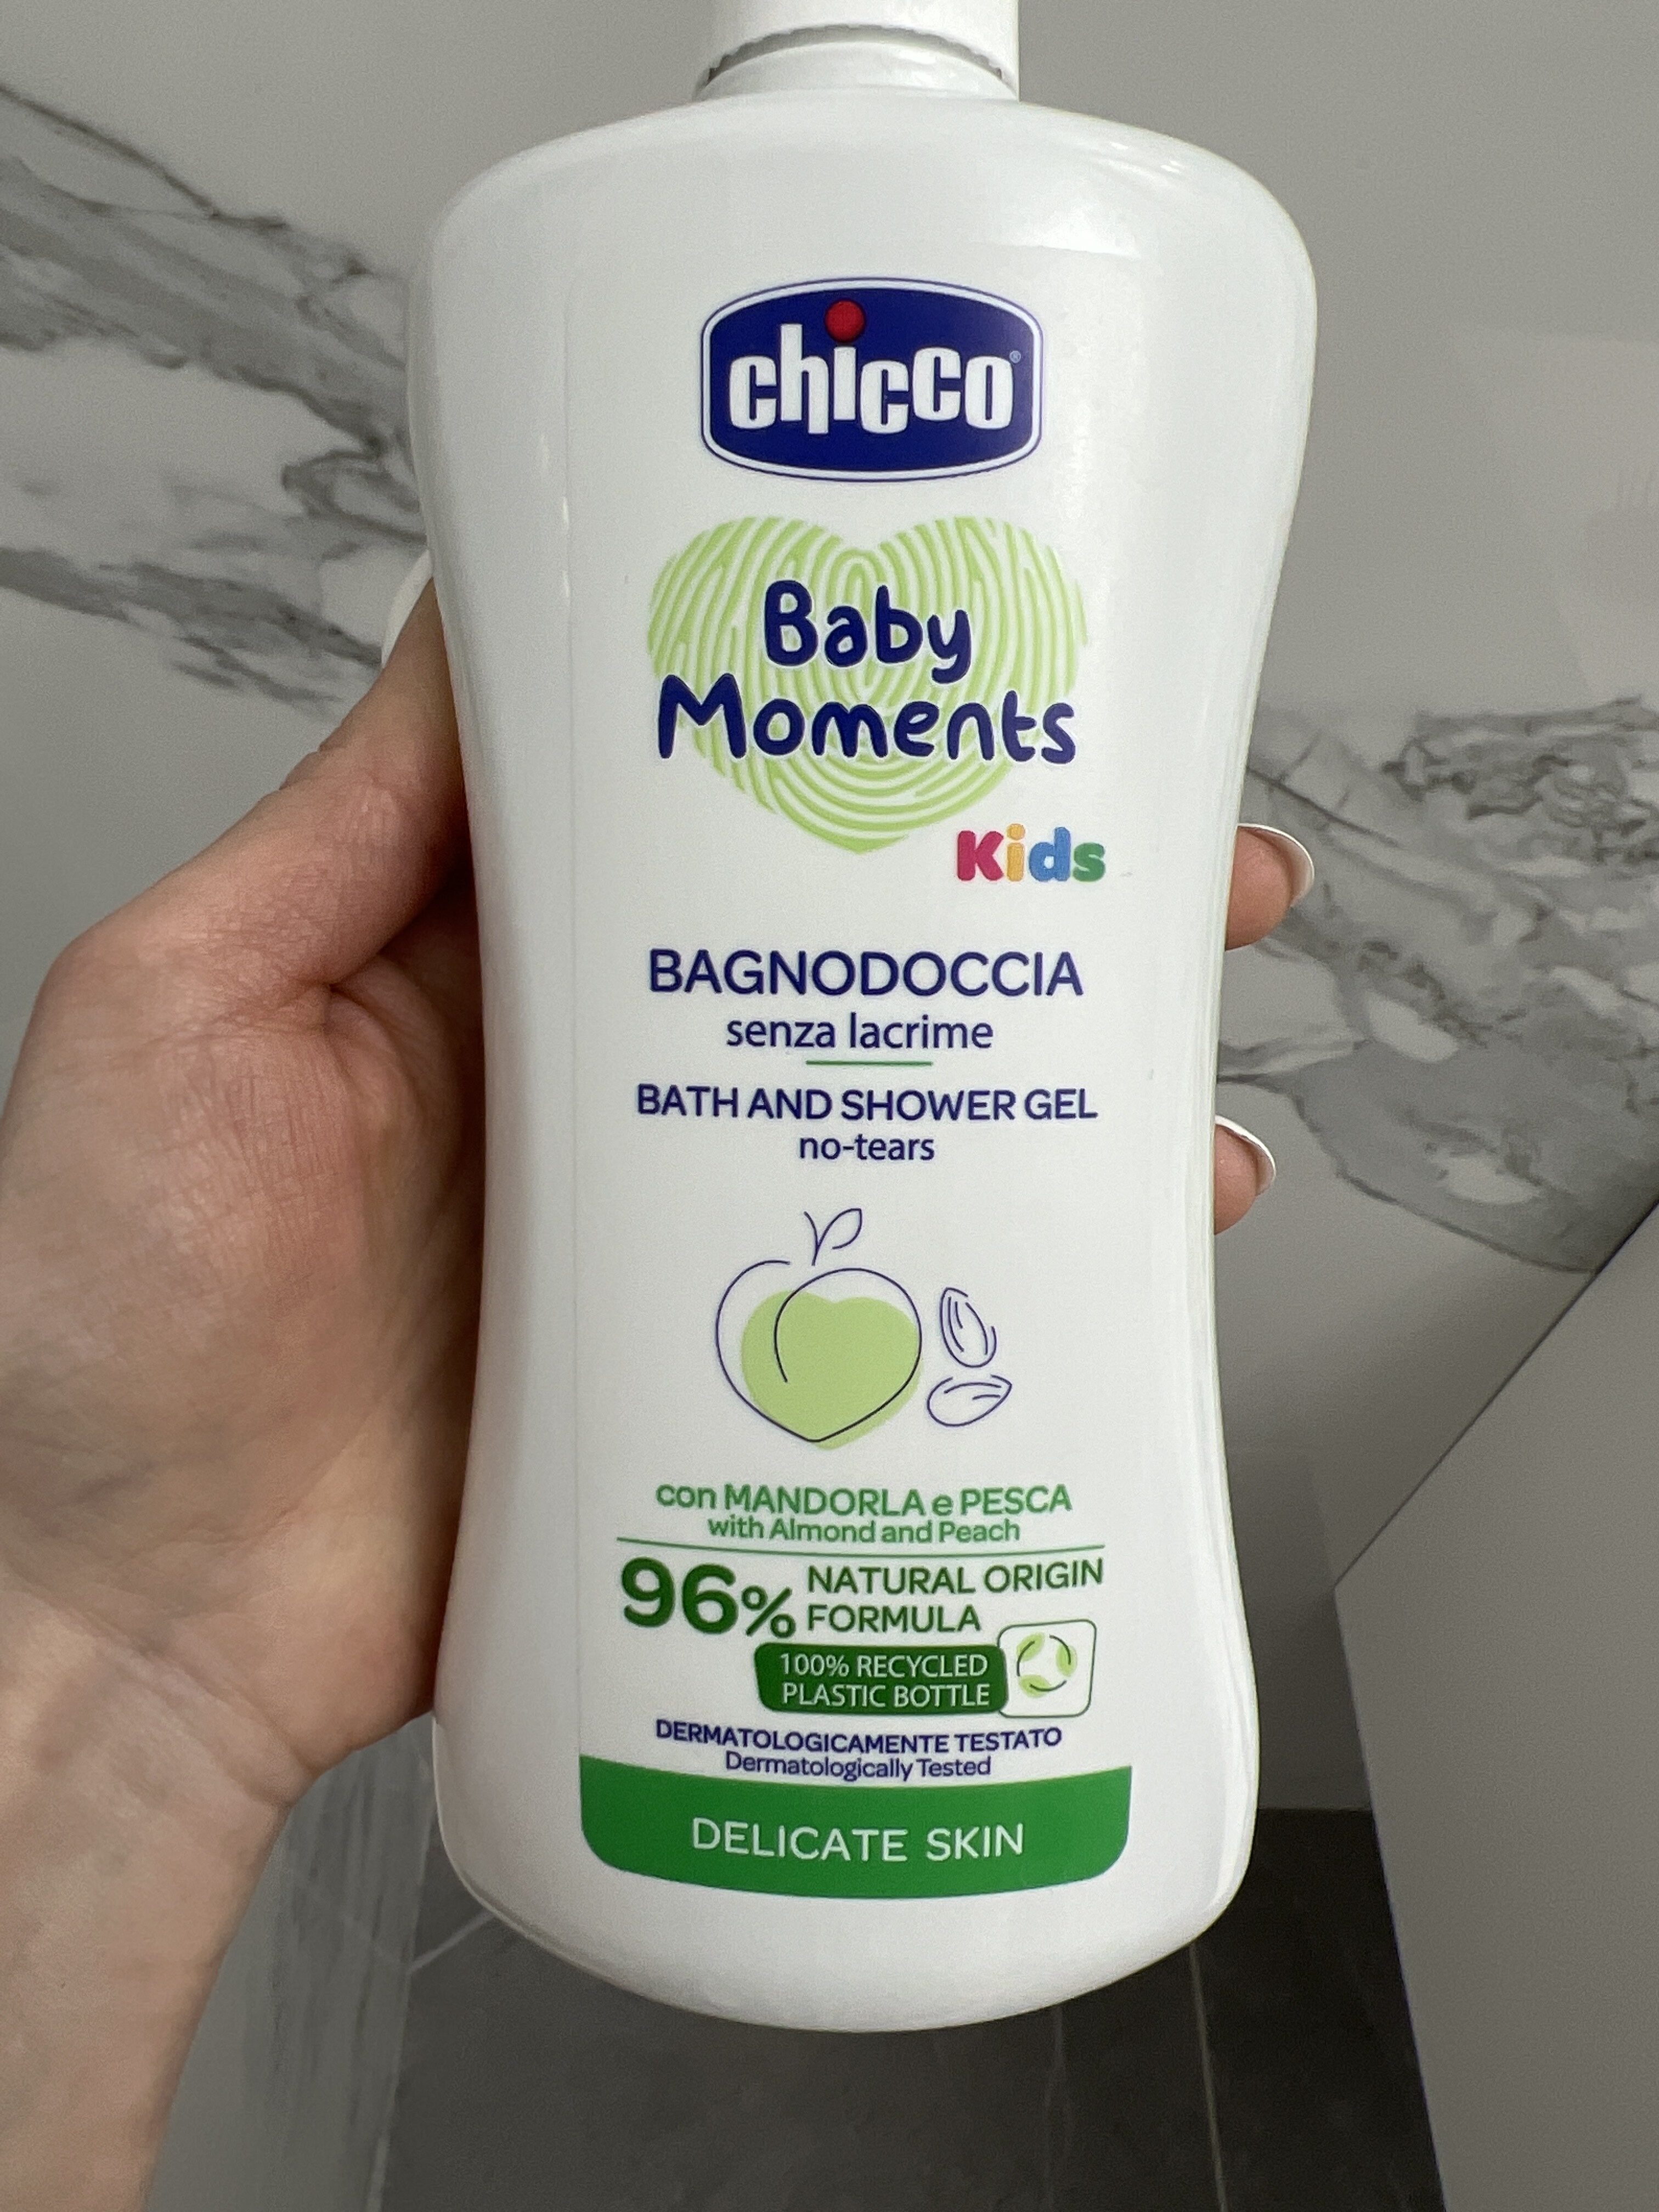 Bath and shower gel Baby Moments Kids - Tuote - ru